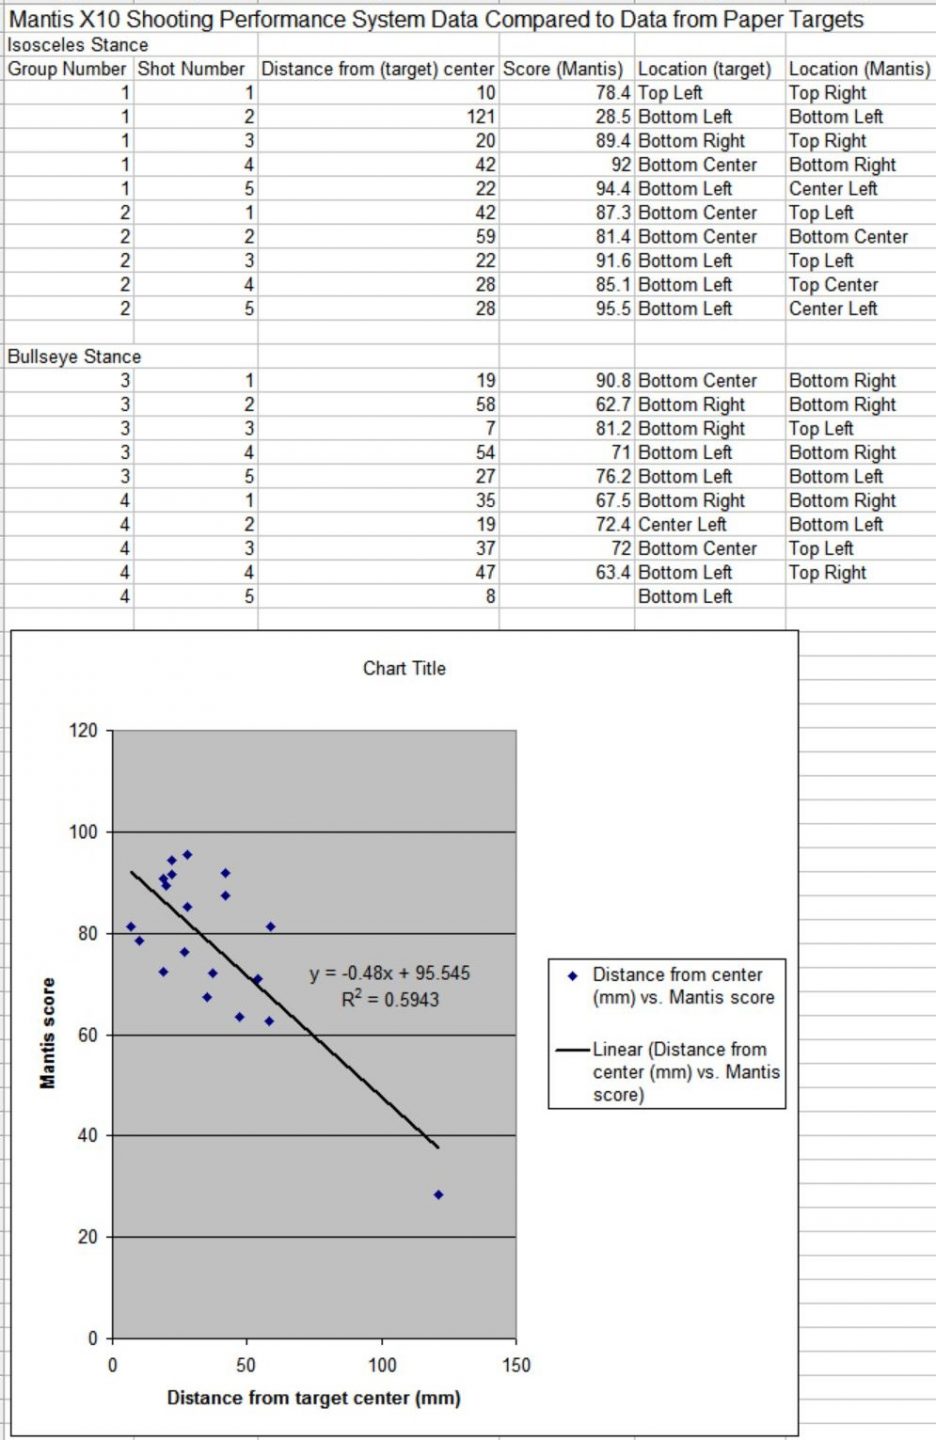 Table and chart containing Mantis X data on 19 shots from two stances and target data for those same shots.